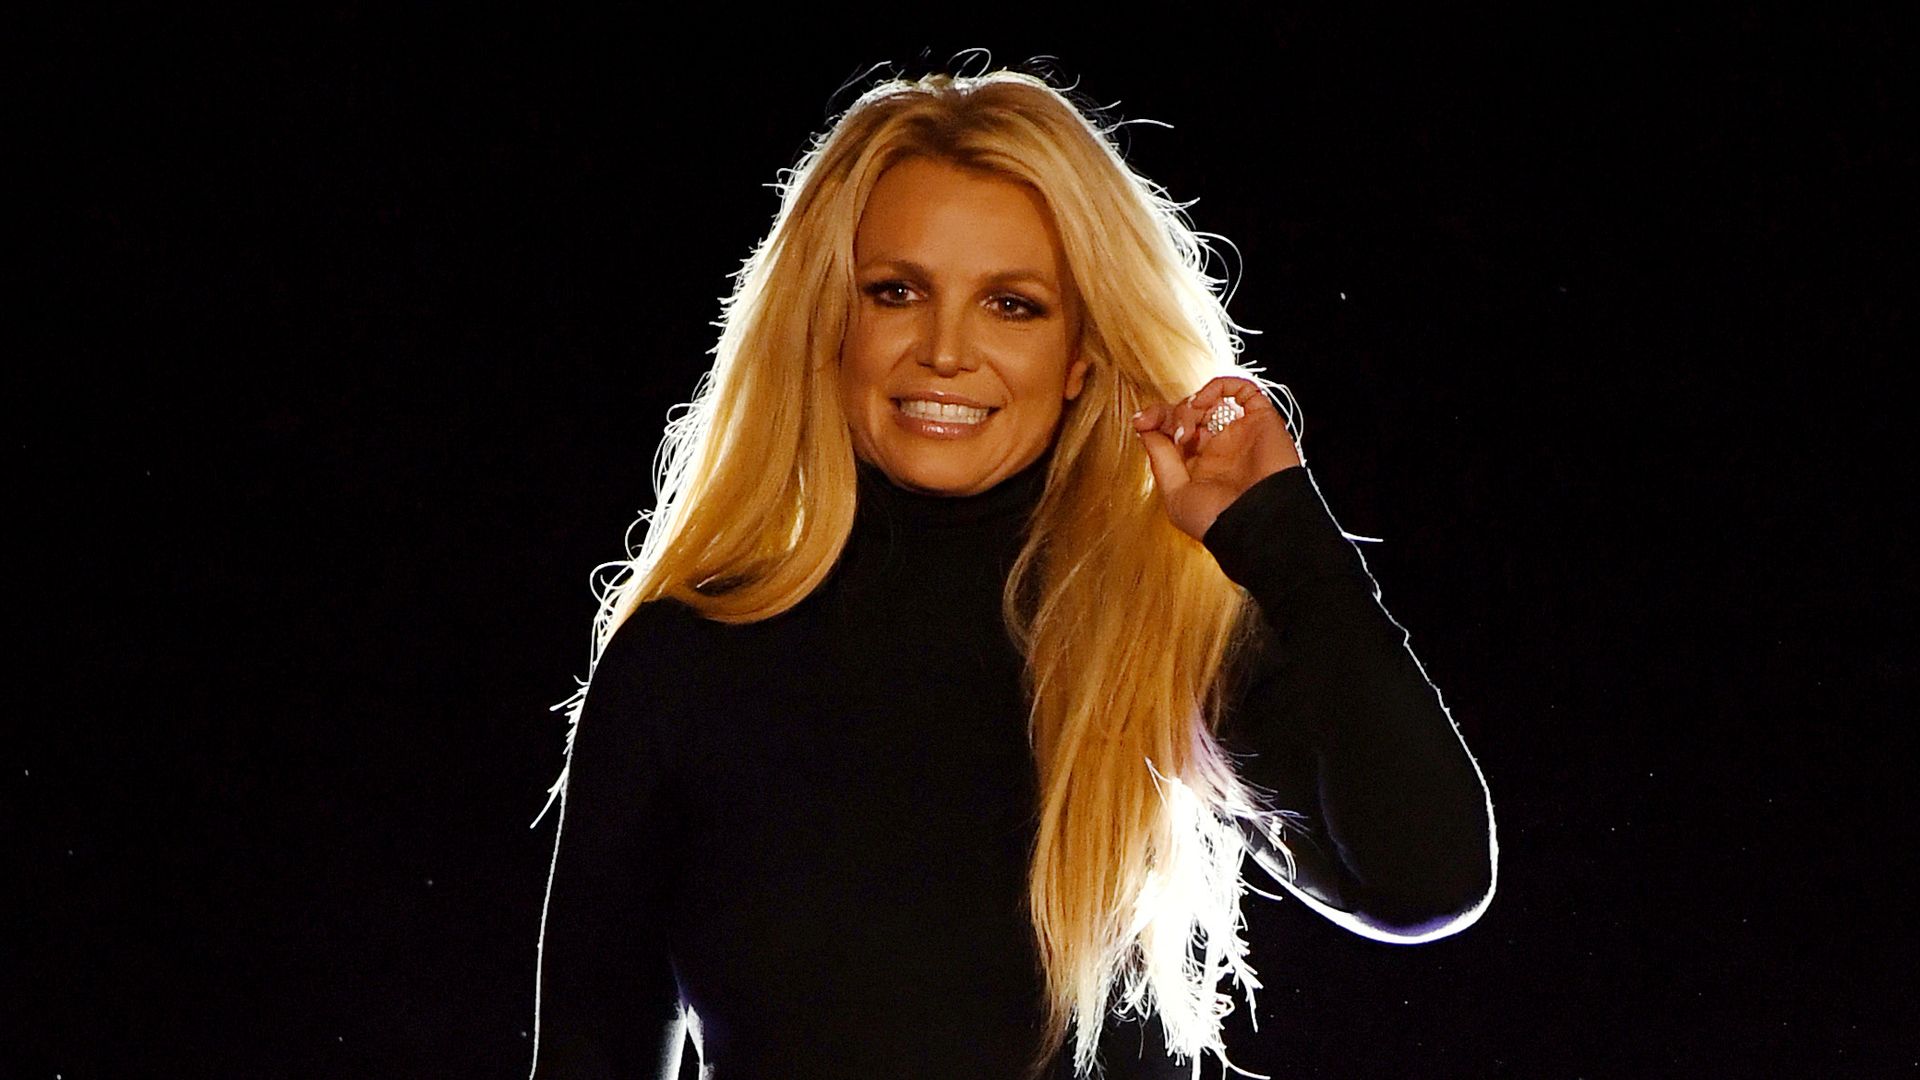 Britney Spears attends the announcement of her new residency, 'Britney: Domination' at Park MGM on October 18, 2018 in Las Vegas, Nevada